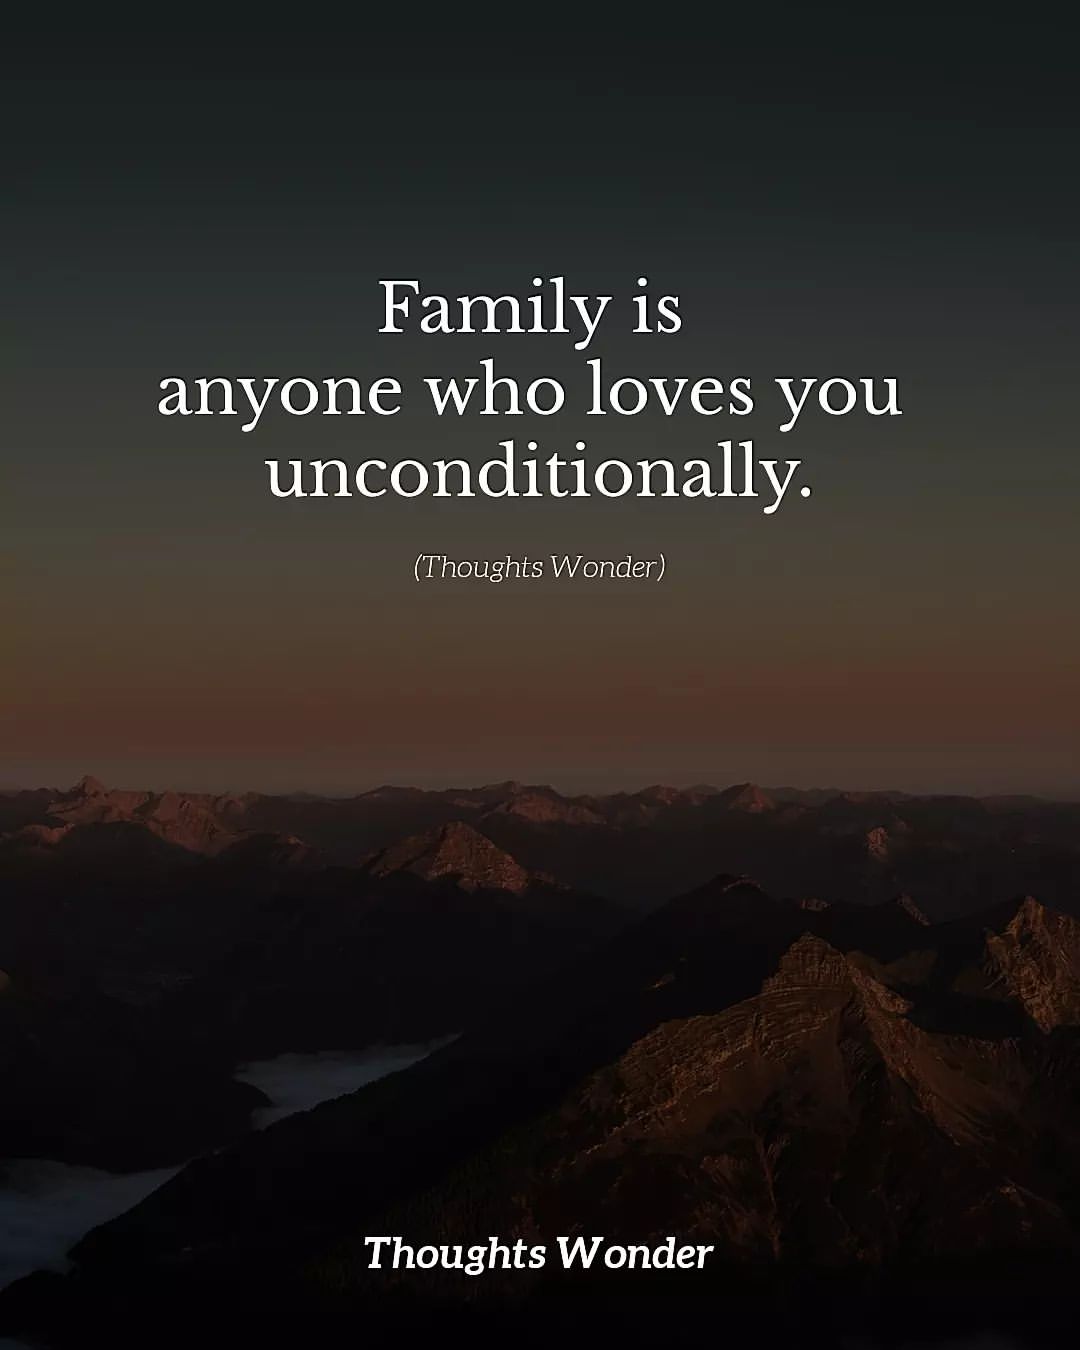 Family is anyone who loves you unconditionally.